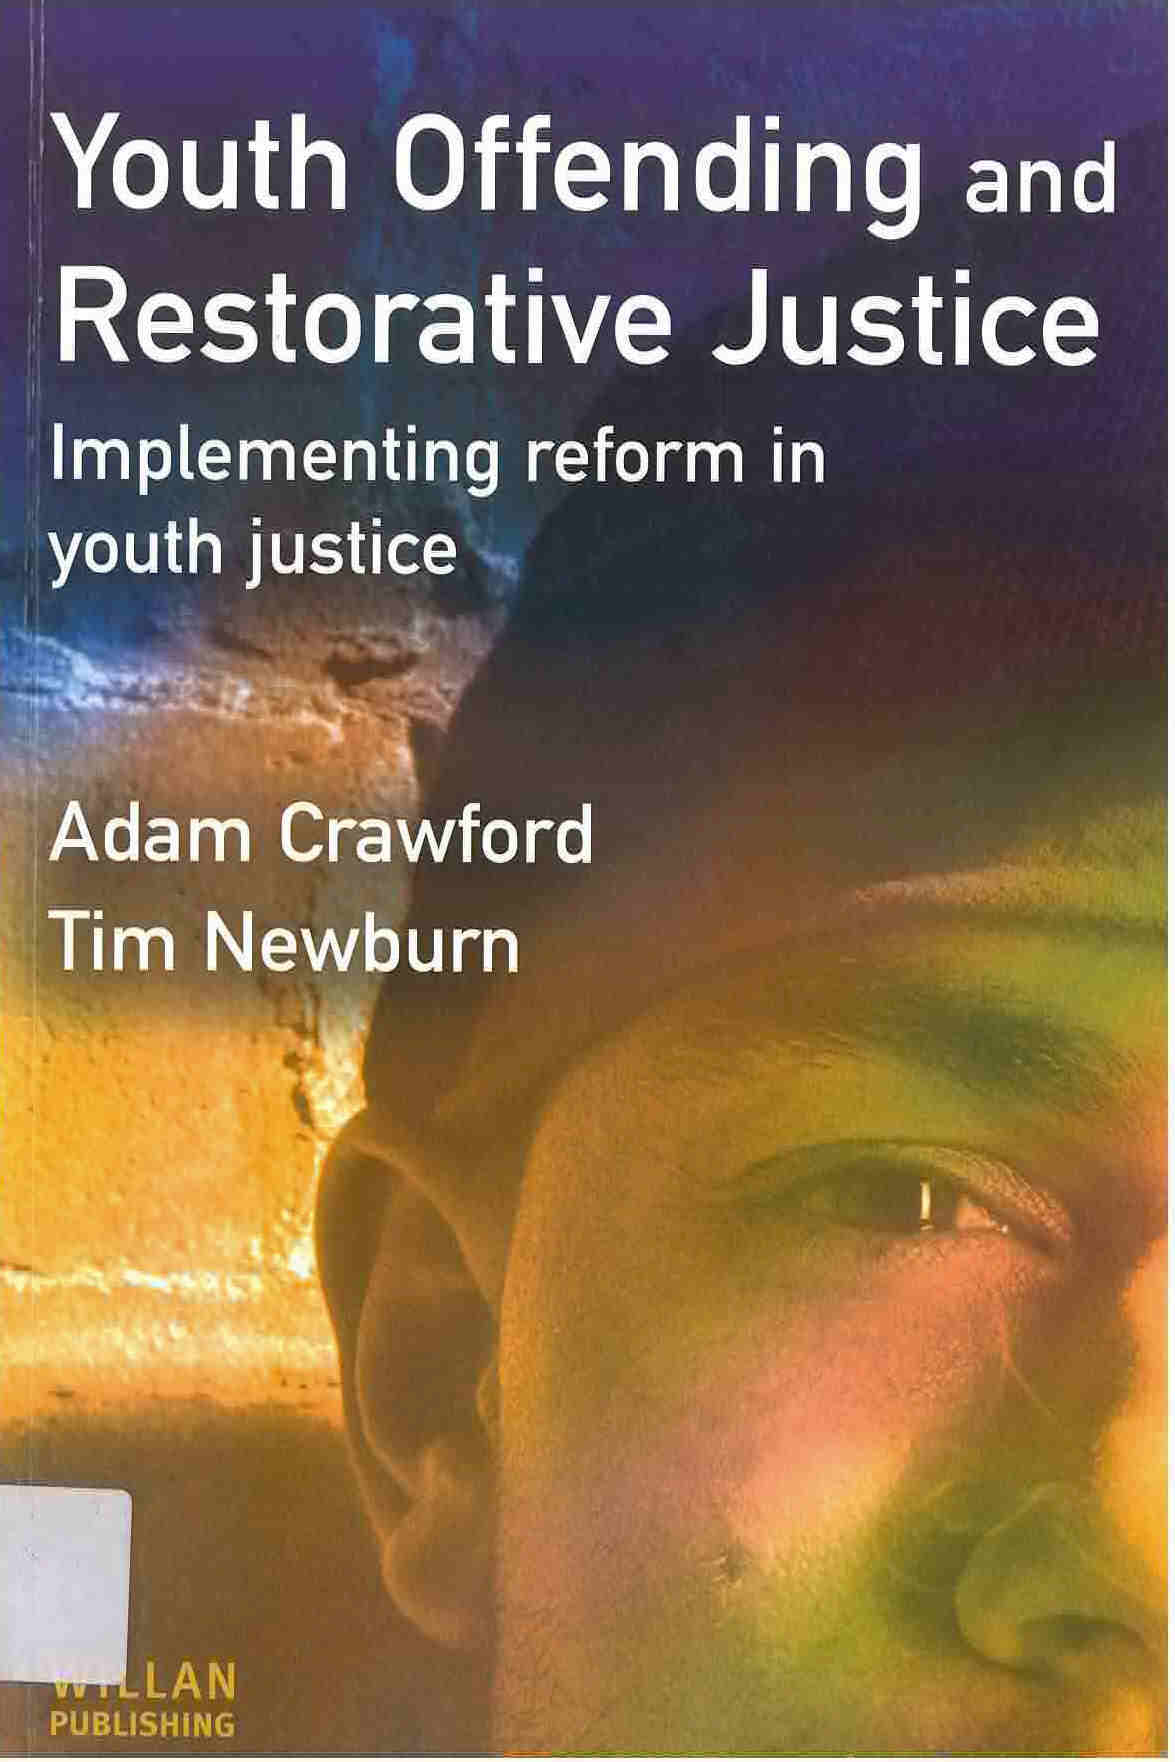 Youth offending and restorative justice : implementing reform in youth justice